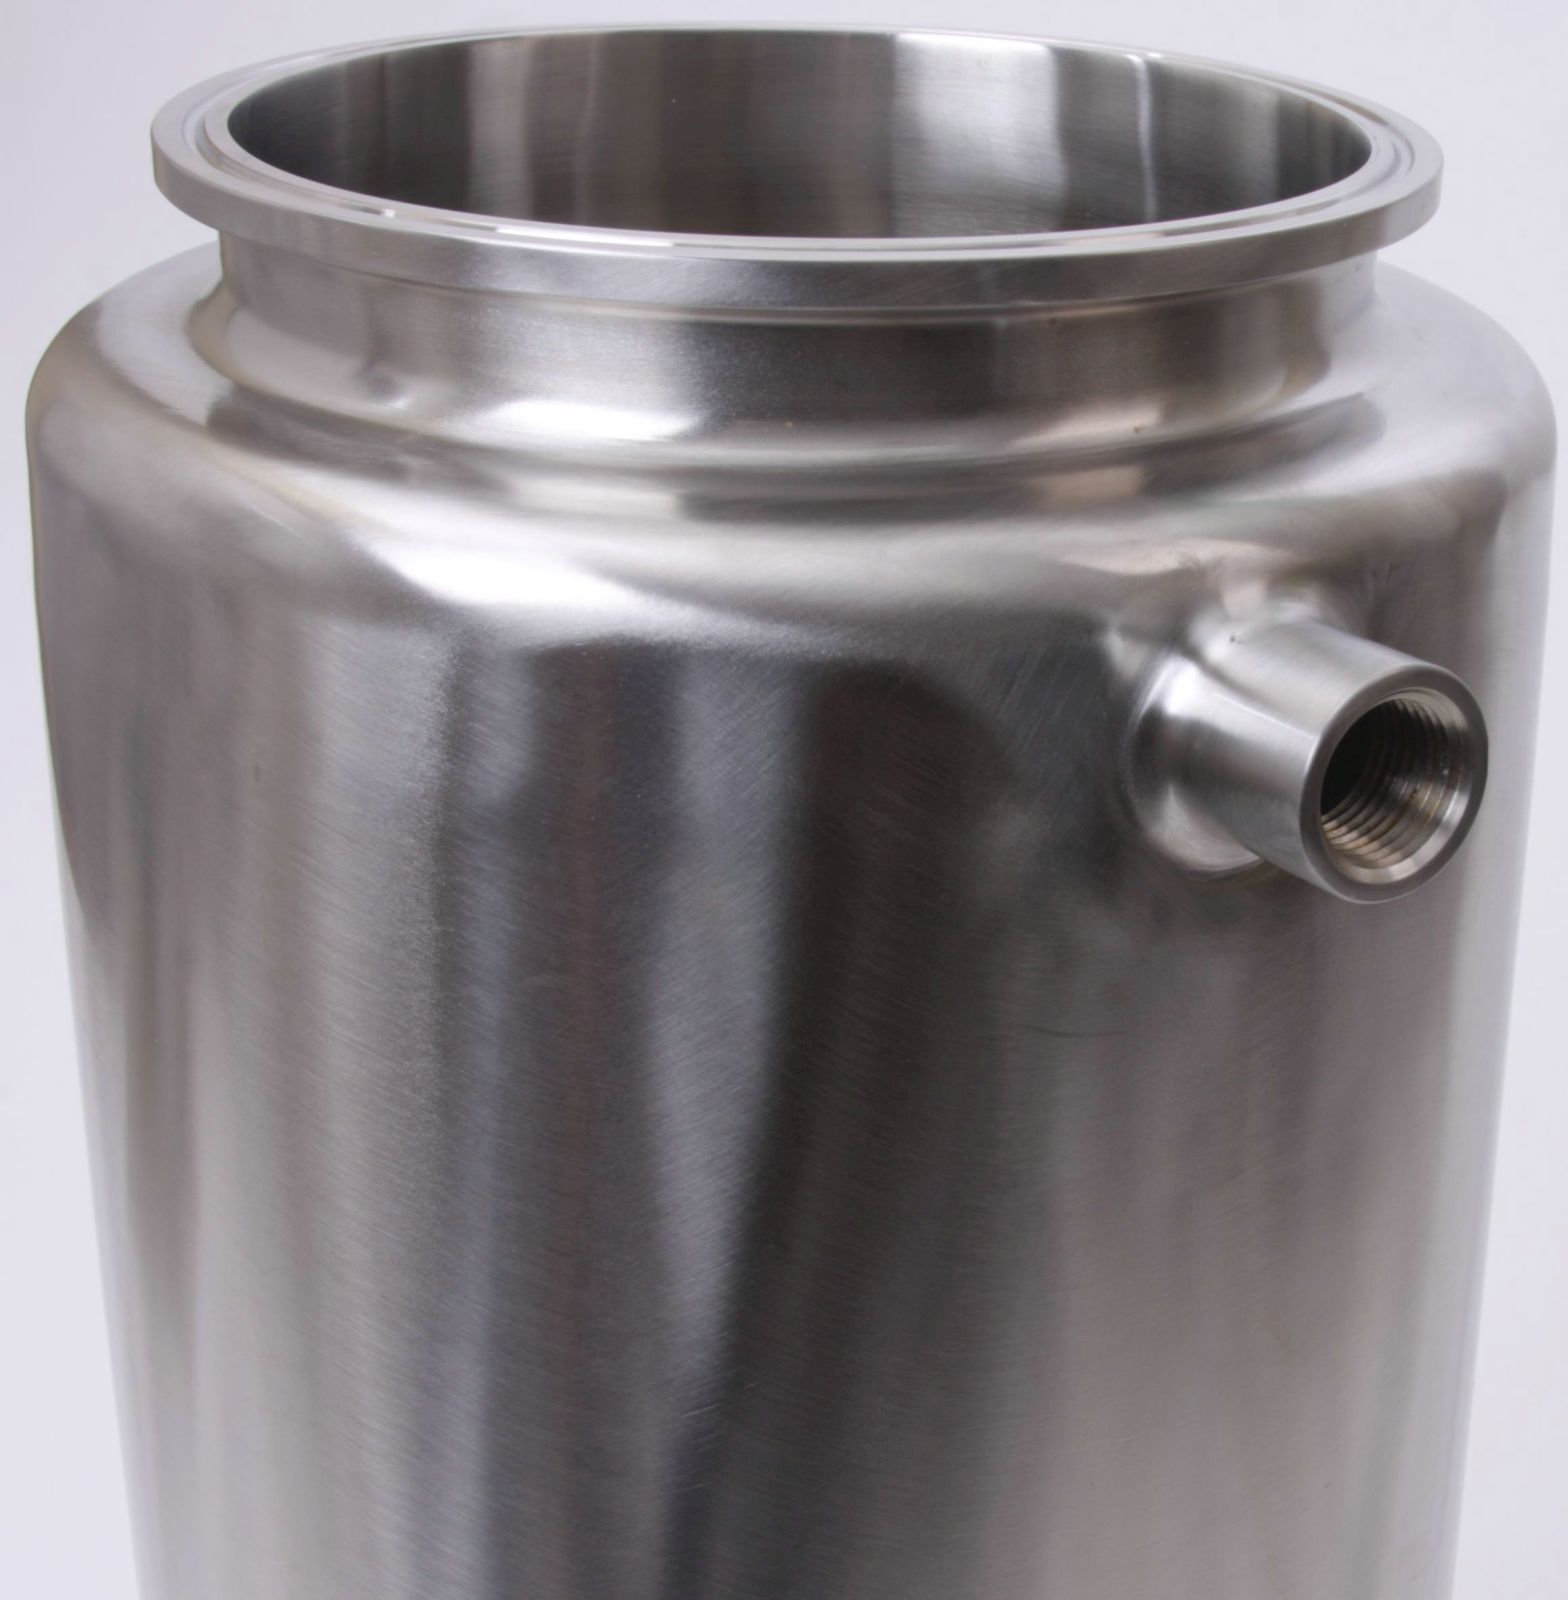 w/ Glacier Tanks - 3 Pack - Stainless Steel SS304 / 3A 2 FNPT 1/2 in Jacketed Material Column Tri Clamp 3 inch x 48 in